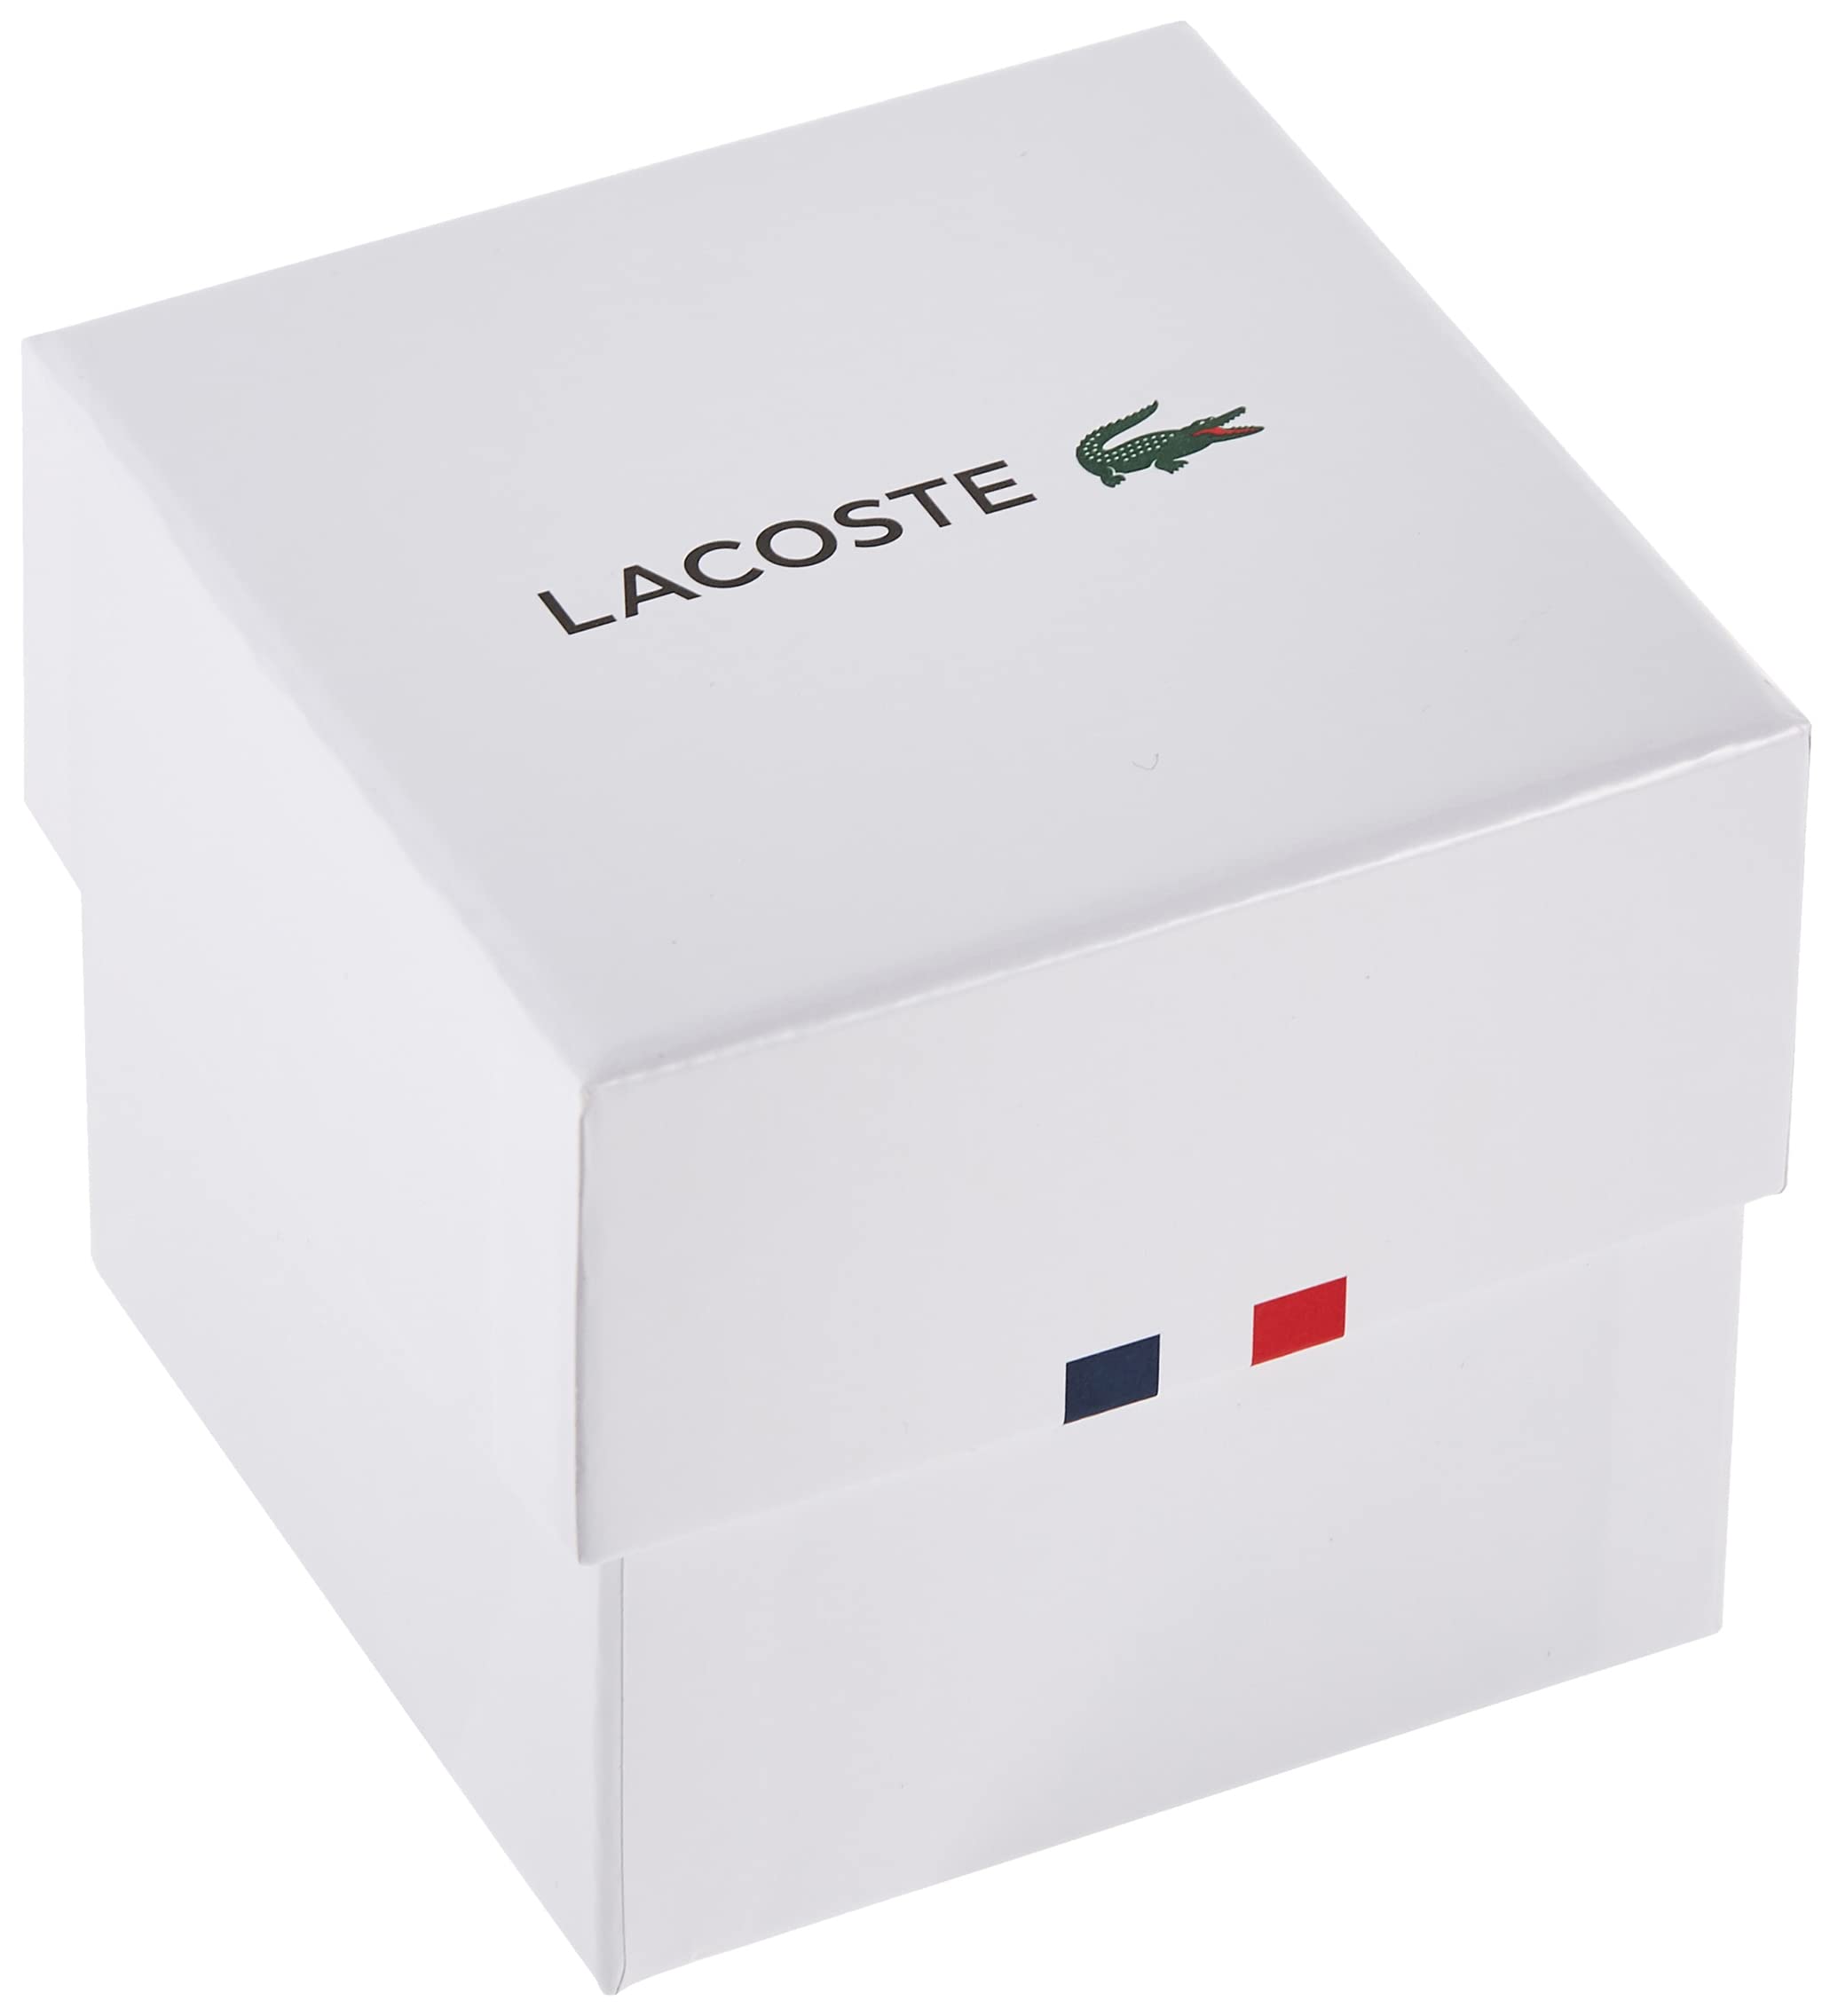 Lacoste 12.12 Men's Classic Quartz Watch - Durable Timepieces, Stylish and Water-Resistant